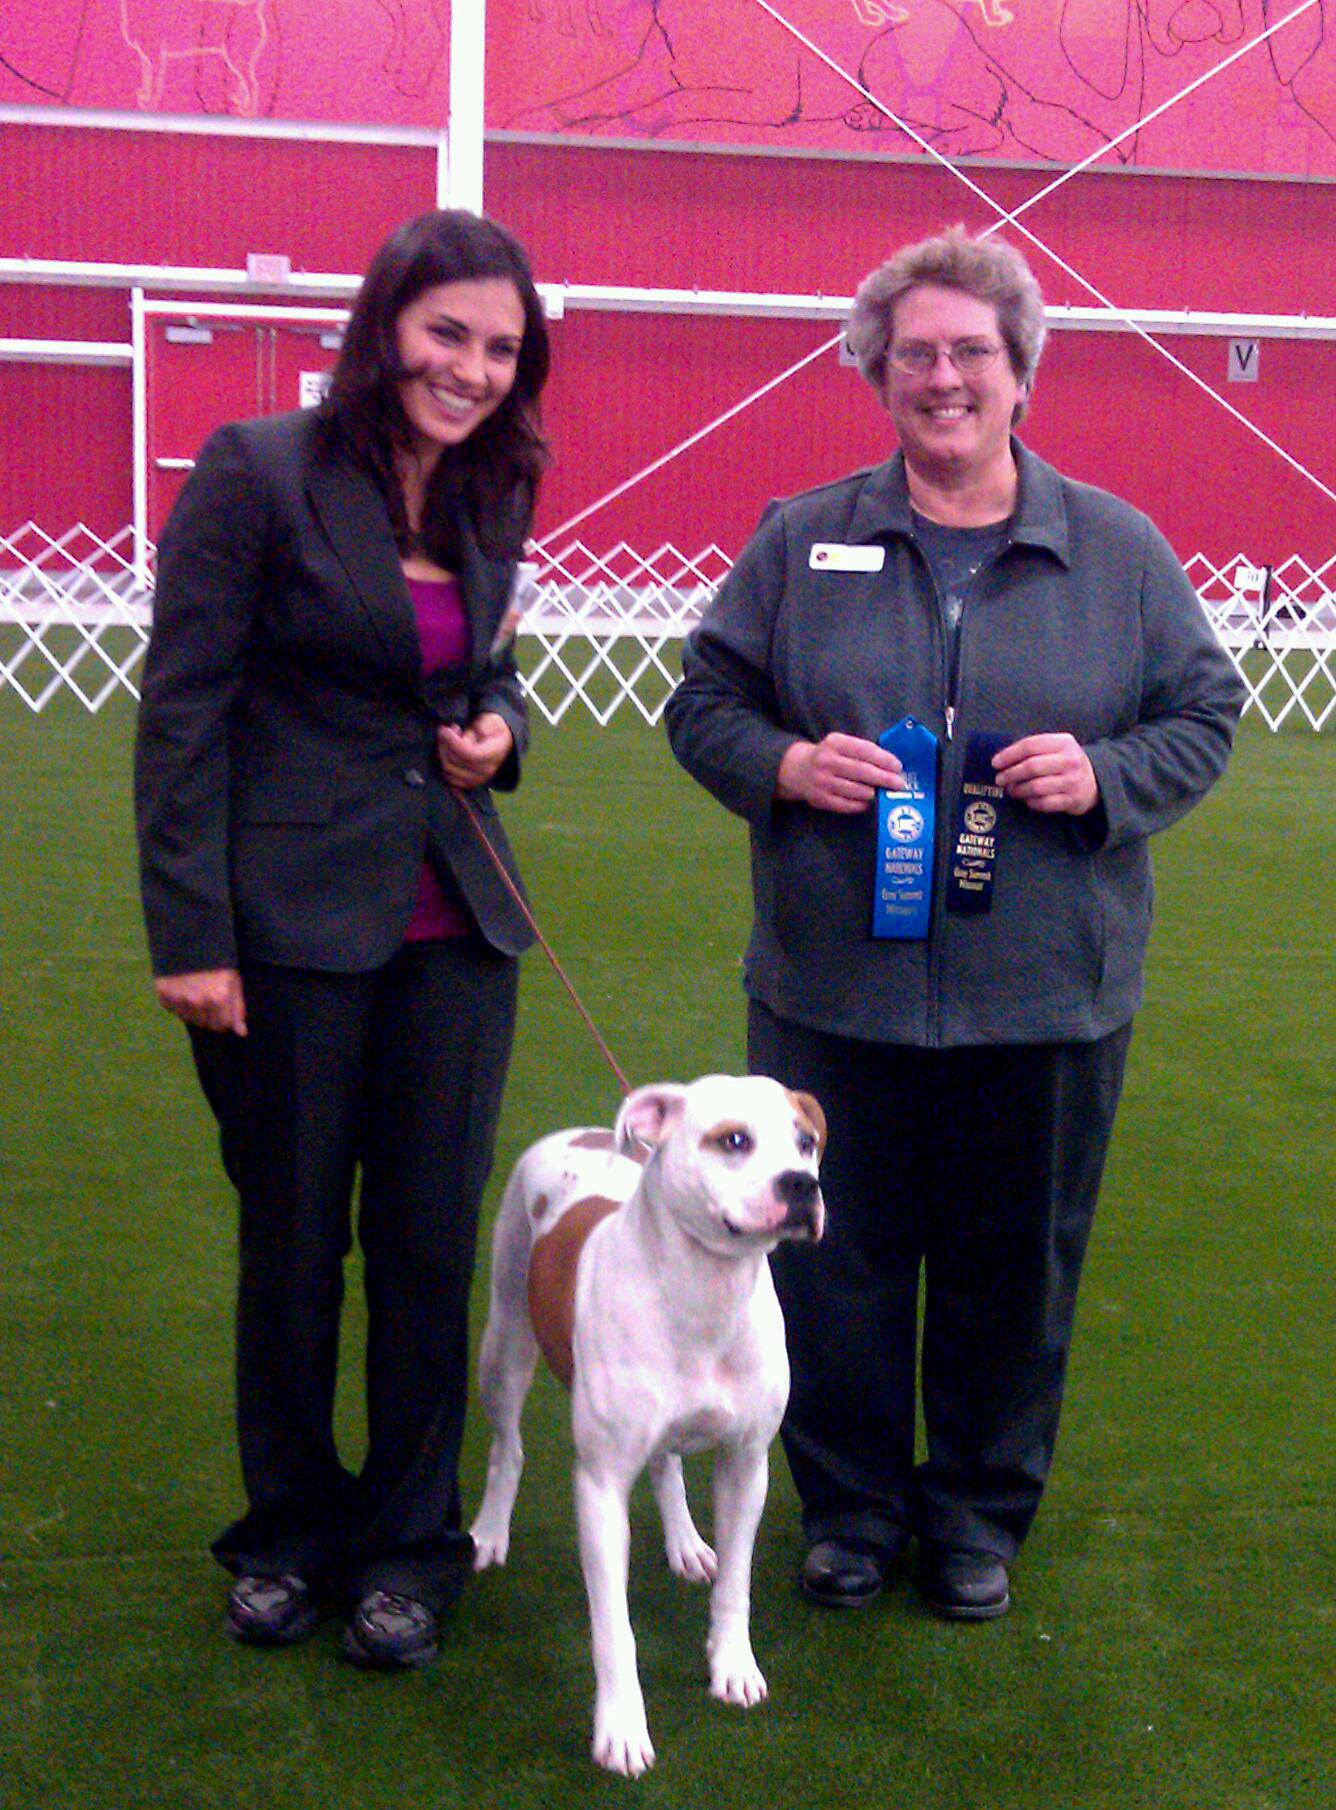 Luna takes first place in her obedience class under Judge Sheryl Peterson